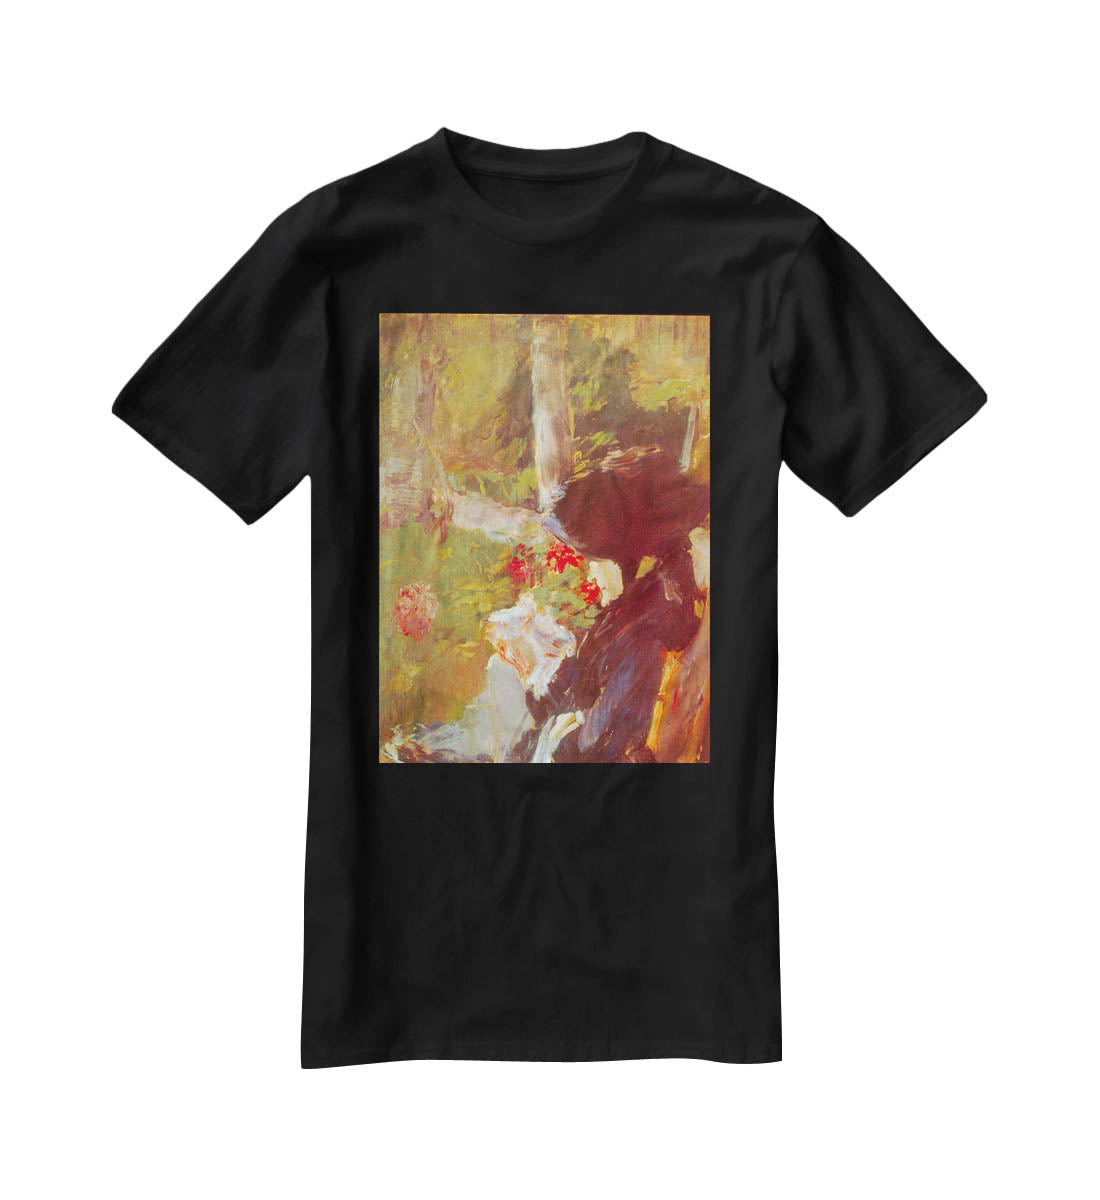 Manets Mother by Manet T-Shirt - Canvas Art Rocks - 1